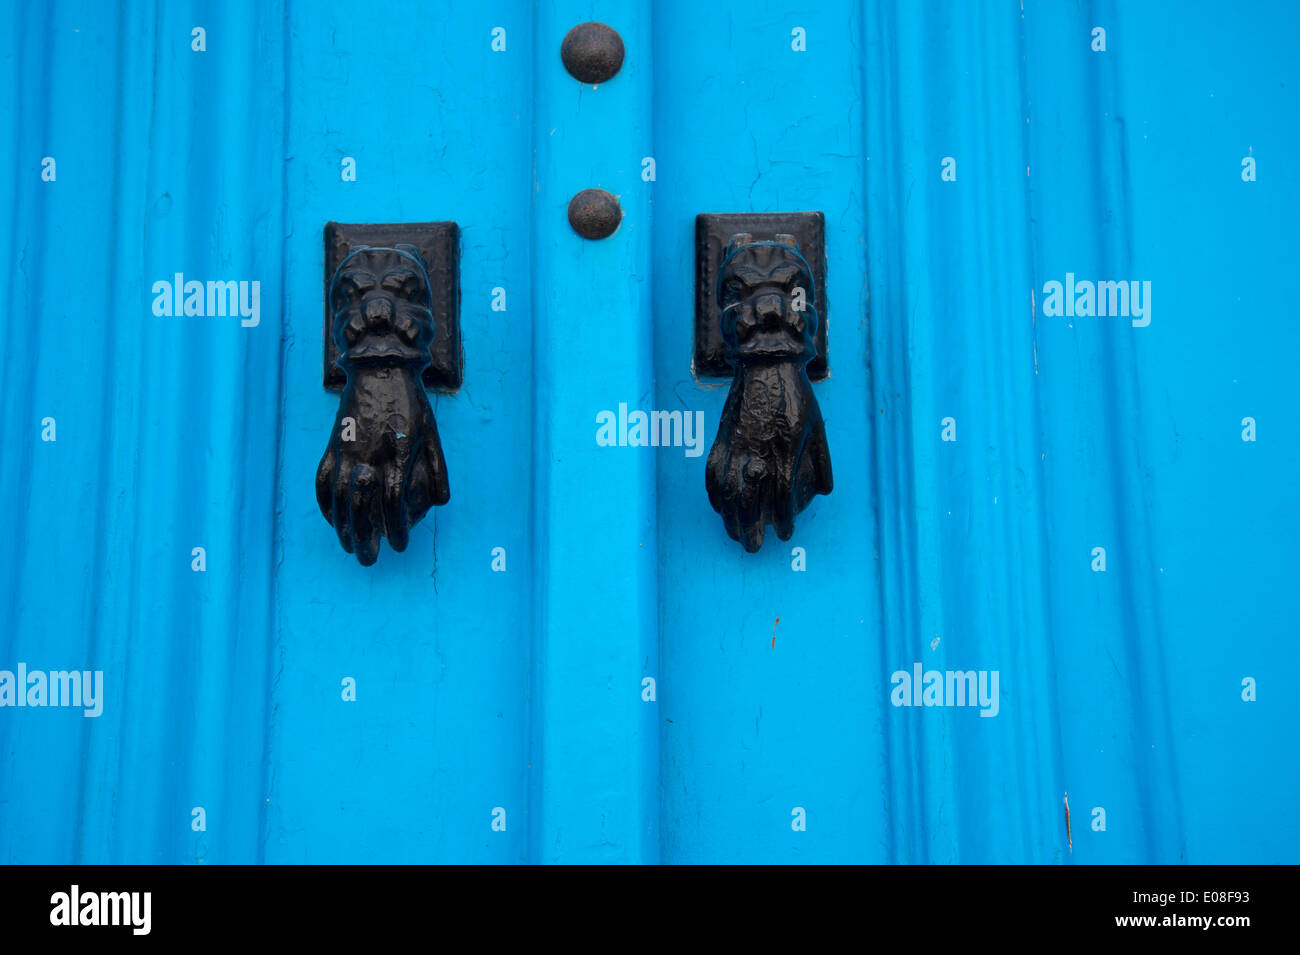 Sidi Bou Said, Tunisia 2014. Traditionally decorated bright blue door with two hands as door knockers. Stock Photo